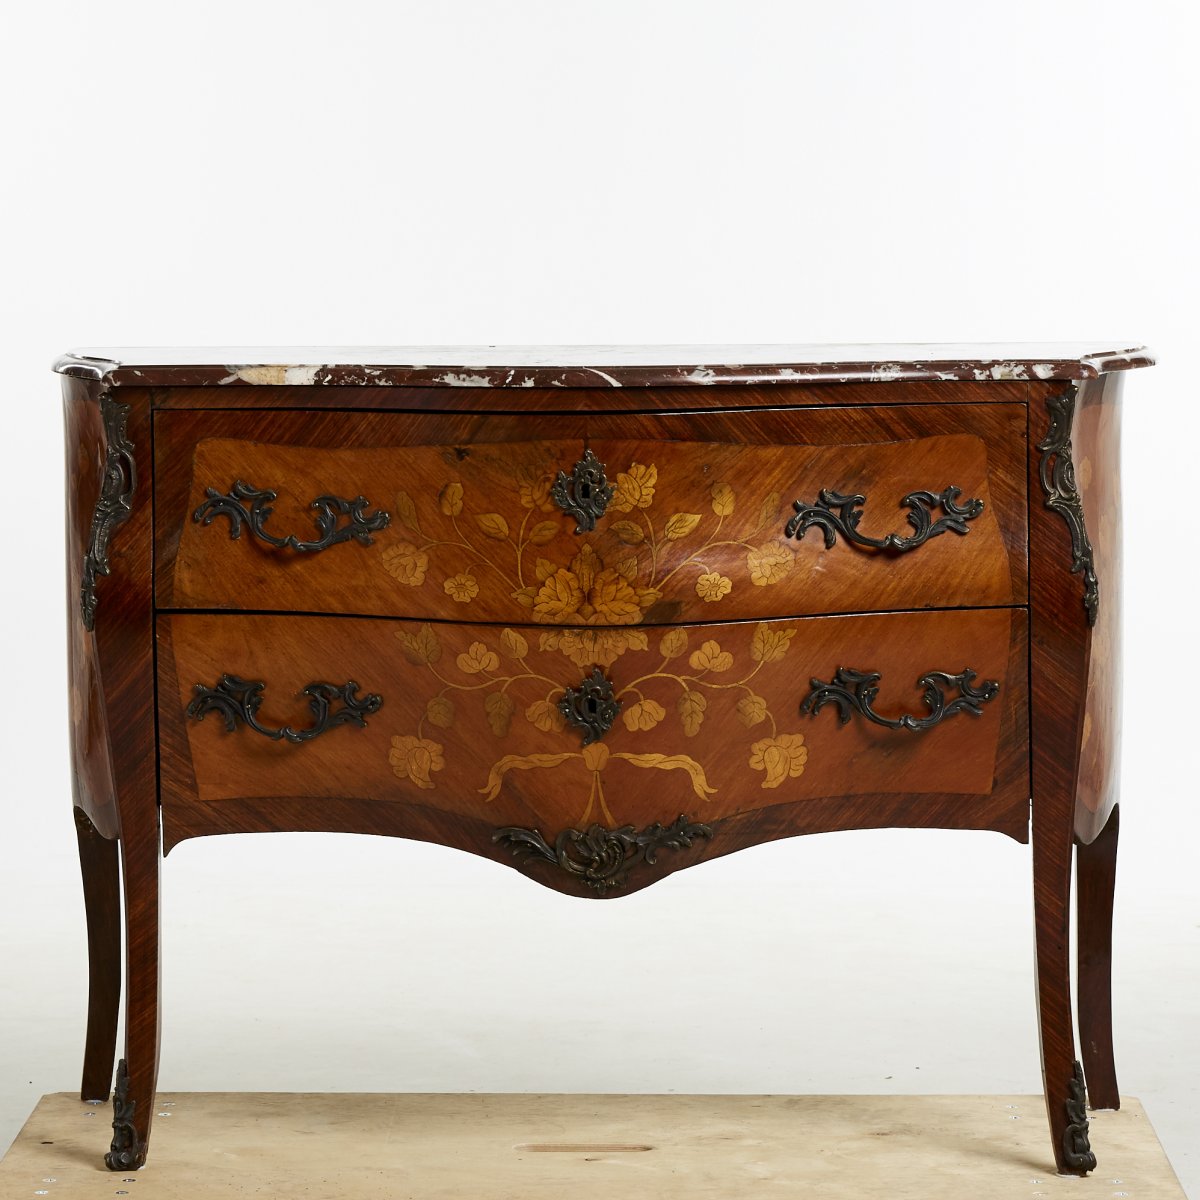 Transitional Commode The Turning Of The Eighteenth And Nineteenth Centuries, Crazy !!!